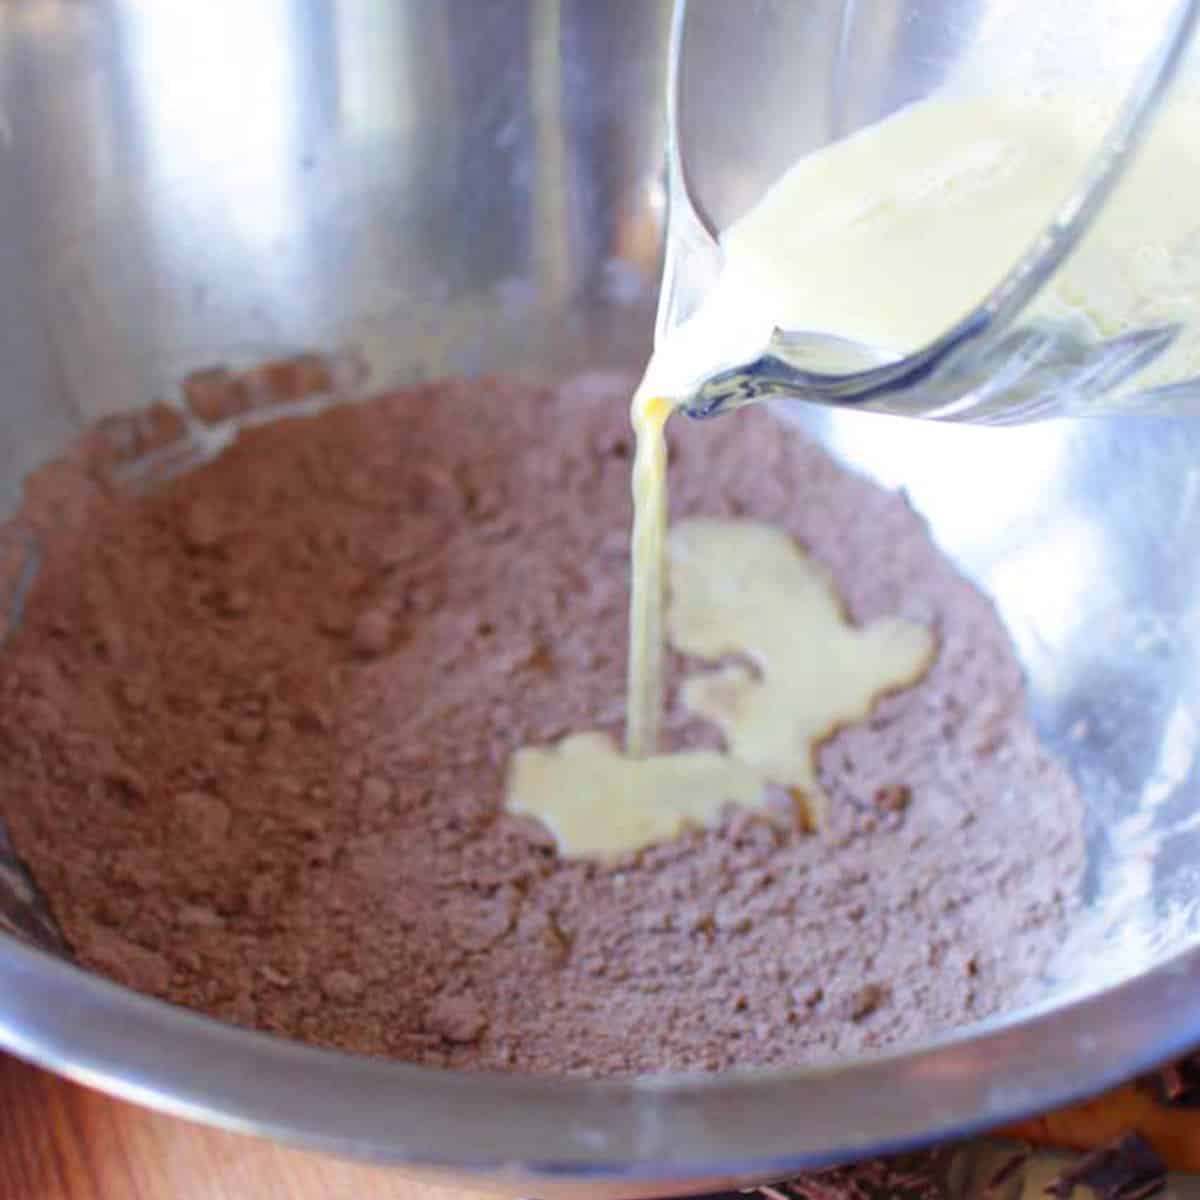 pouring milk into the dry ingredients in a mixing bowl for scones